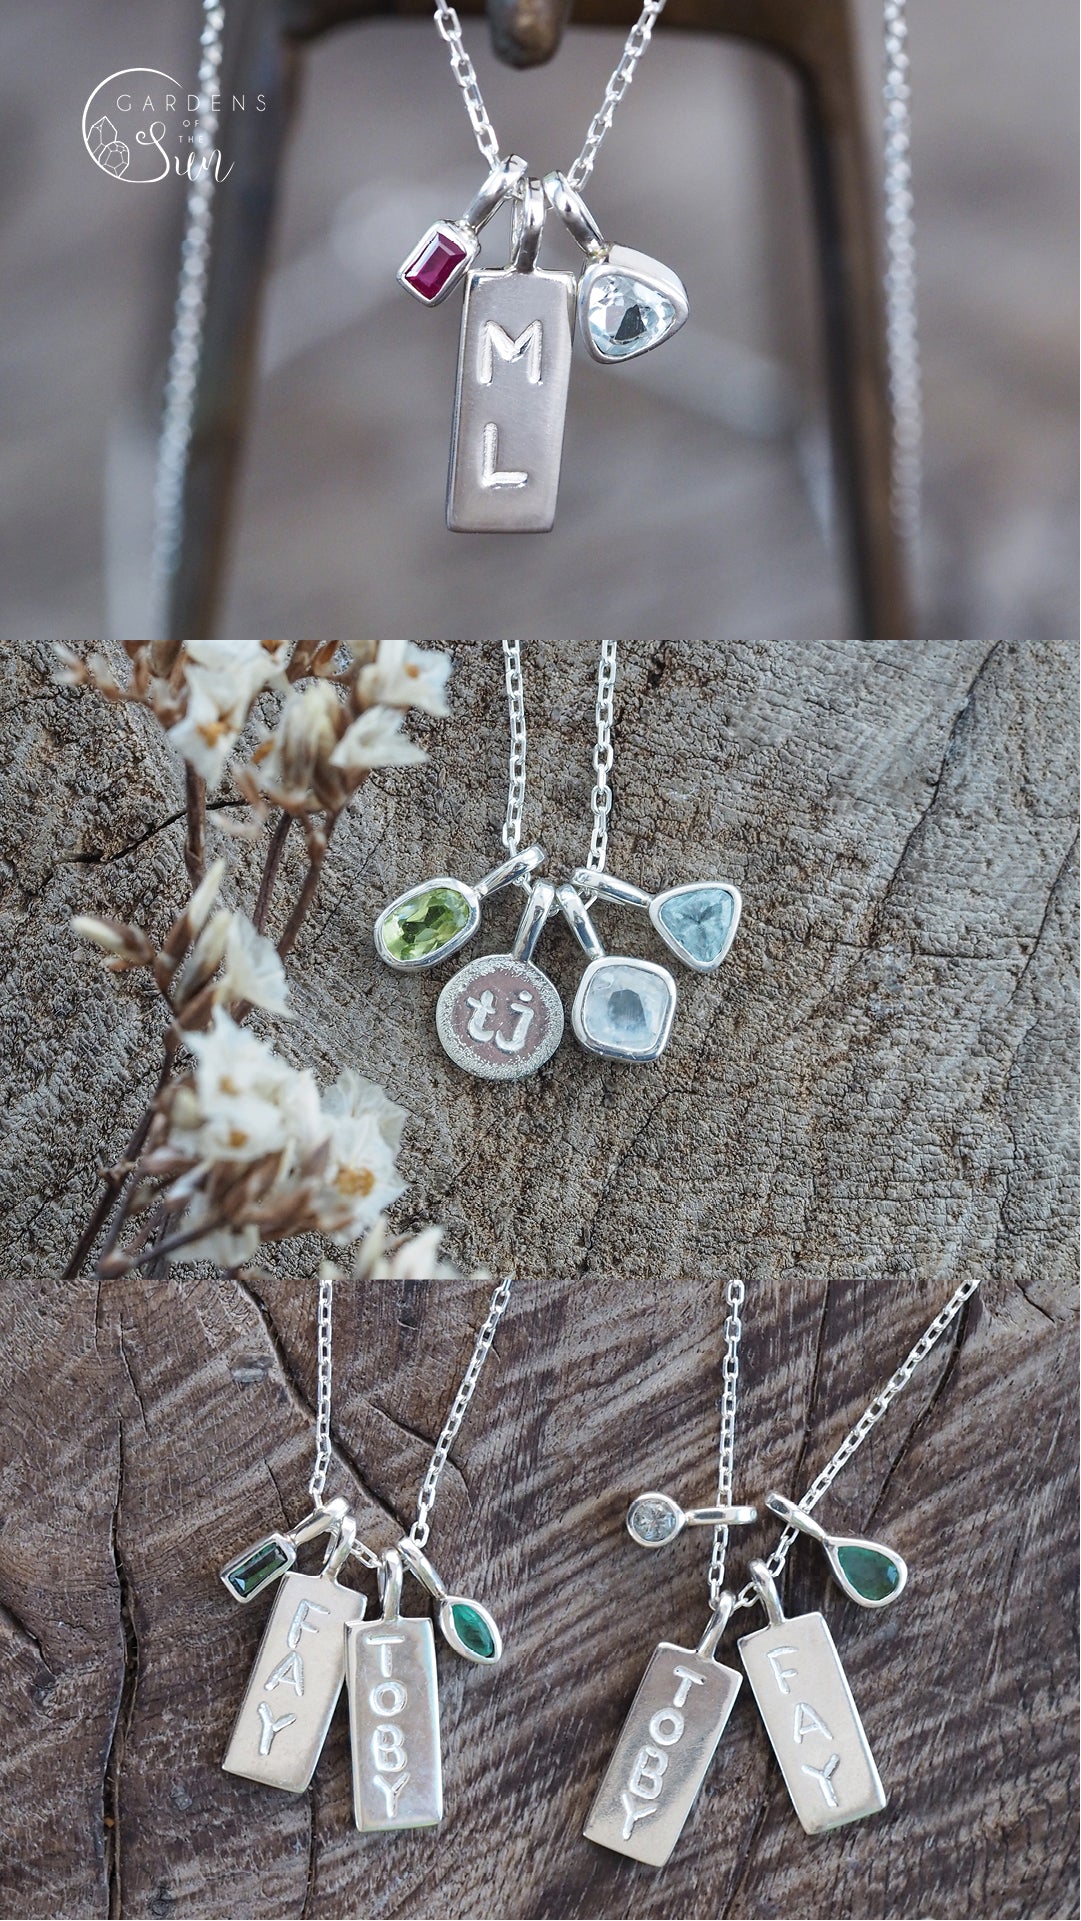 Birthstone Necklace, Family Tree Charm Necklace, Family Tree Jewelry,  Sterling Silver Necklace, Gift for Mom, Grandmother Gift · NY6 Design |  Wholesale Beads online, Jewelry Making Supplies in Dallas suburb